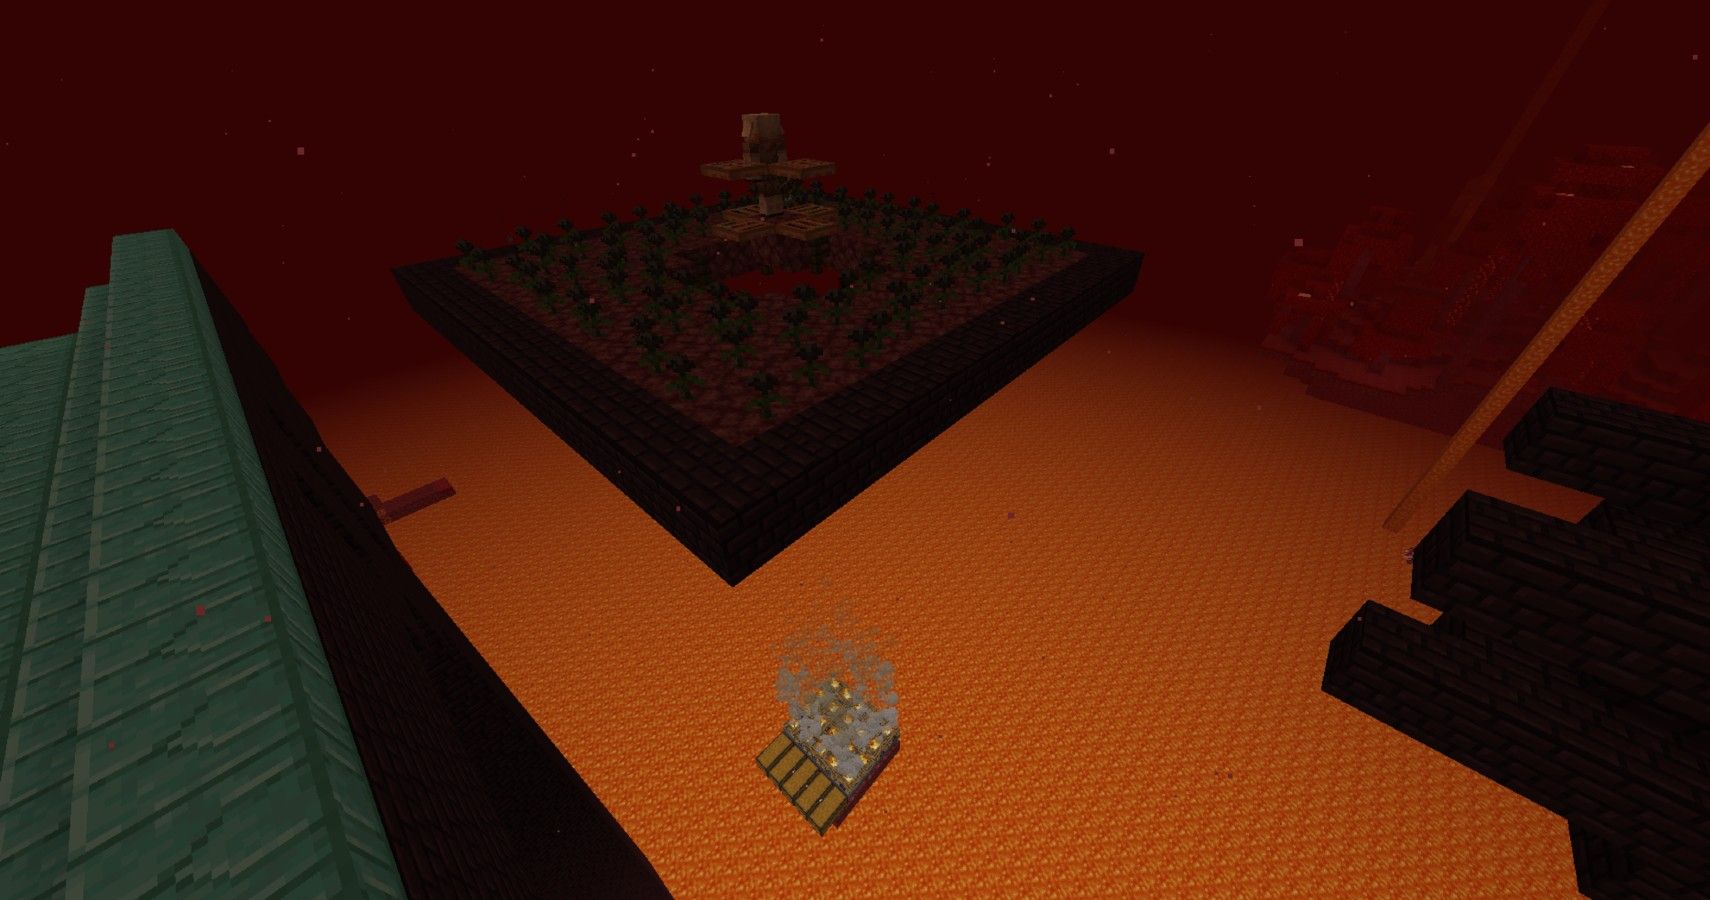 Completed Wither Skeleton Farm in Minecraft